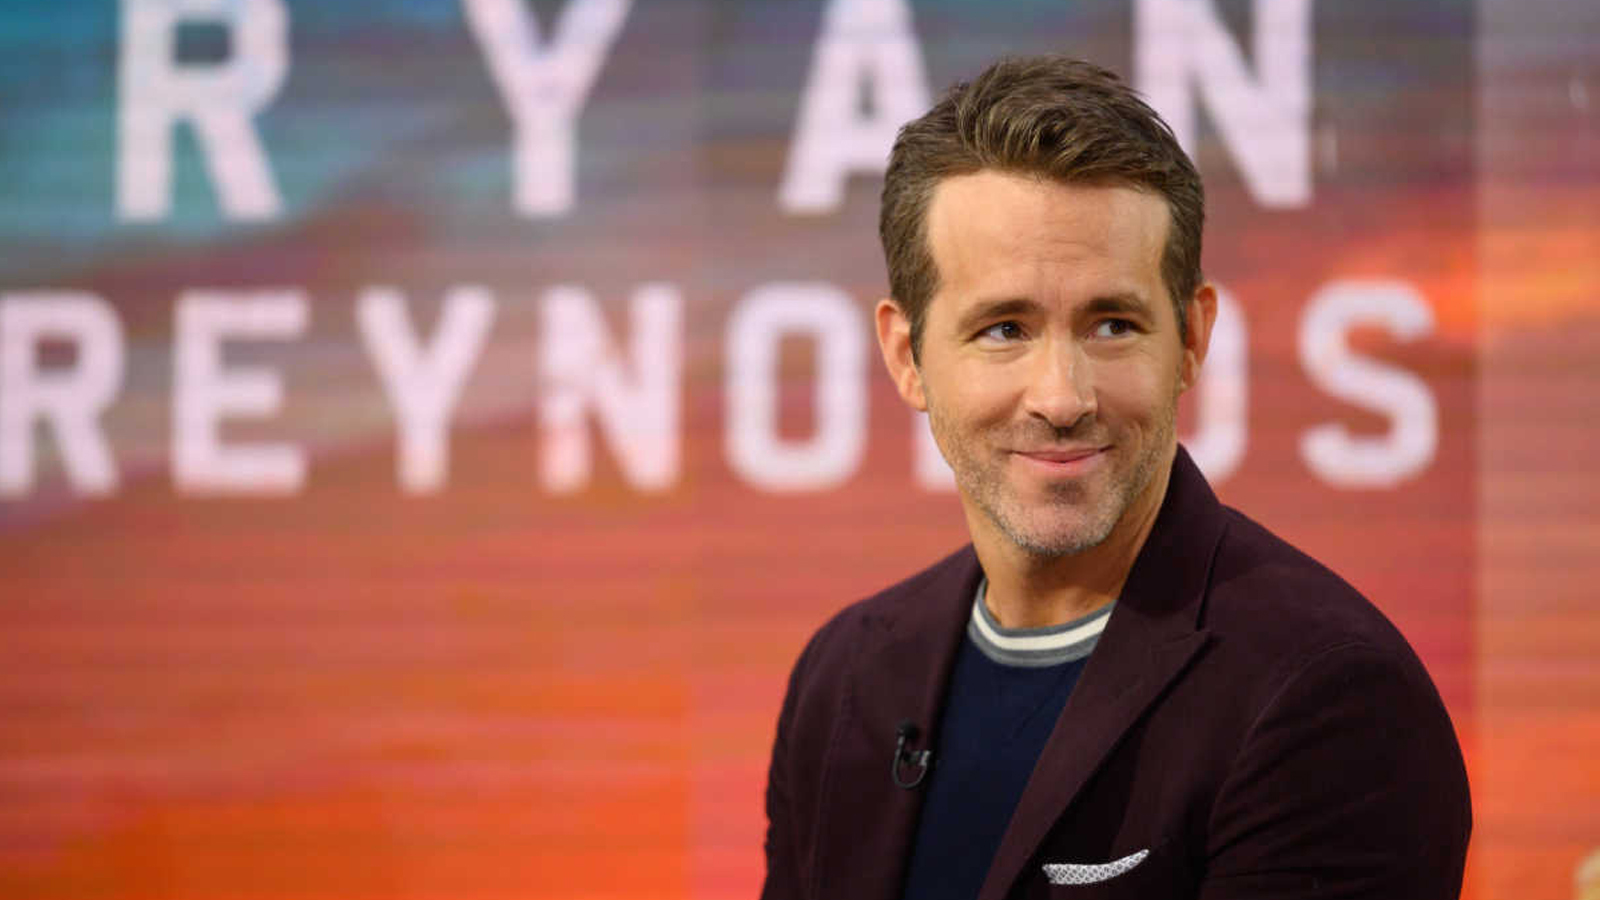 The Best Ryan Reynolds Movies And Where To Watch Them